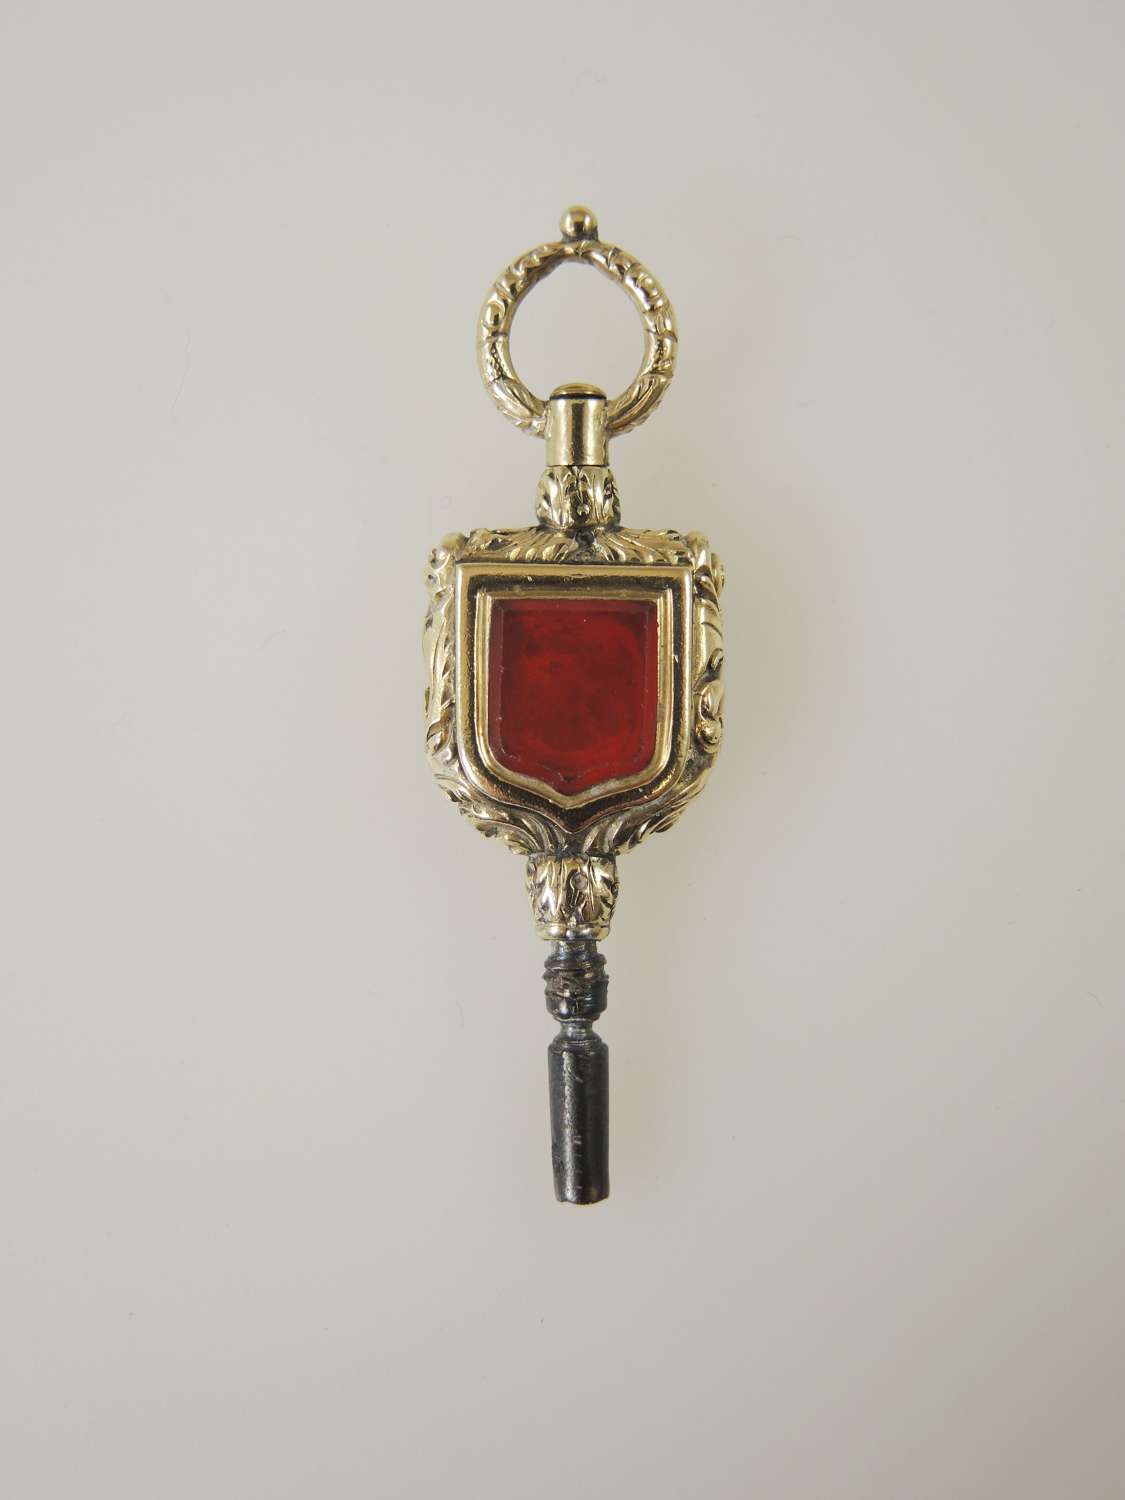 Beautiful Victorian gold cased and Agate set pocket watch key c1850